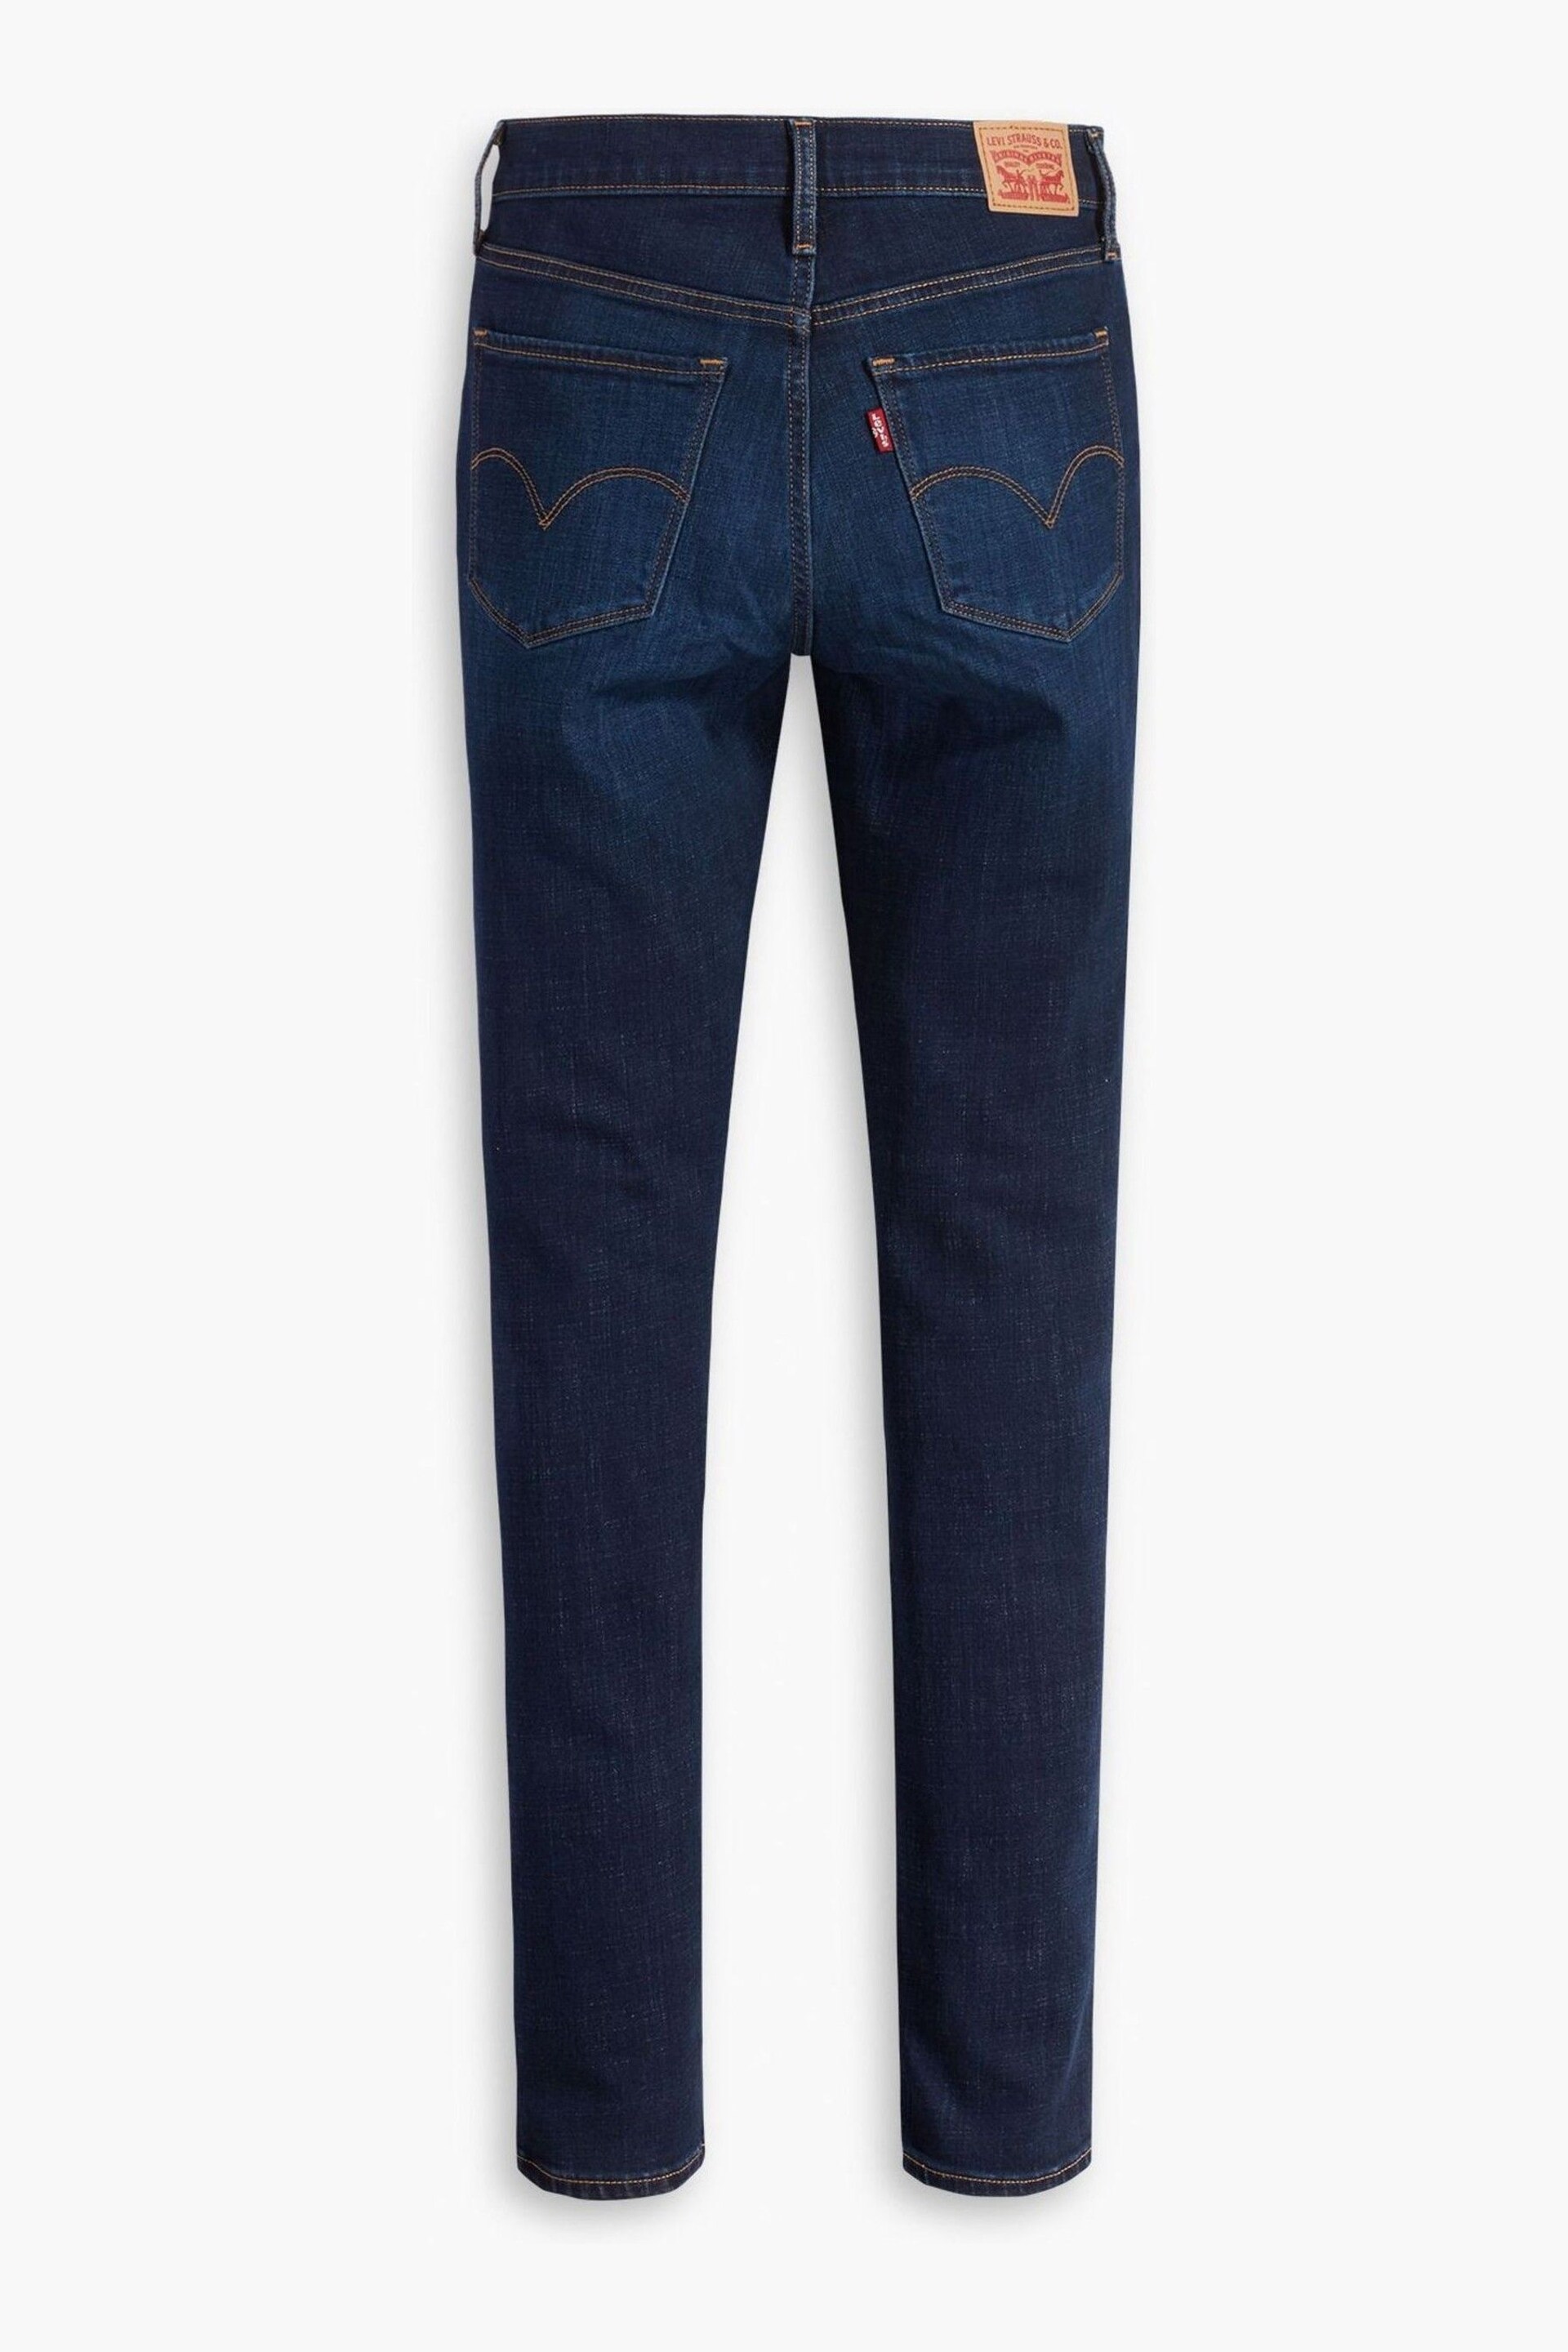 Levi's® Blue 311™ Shaping Skinny Jeans - Image 5 of 6